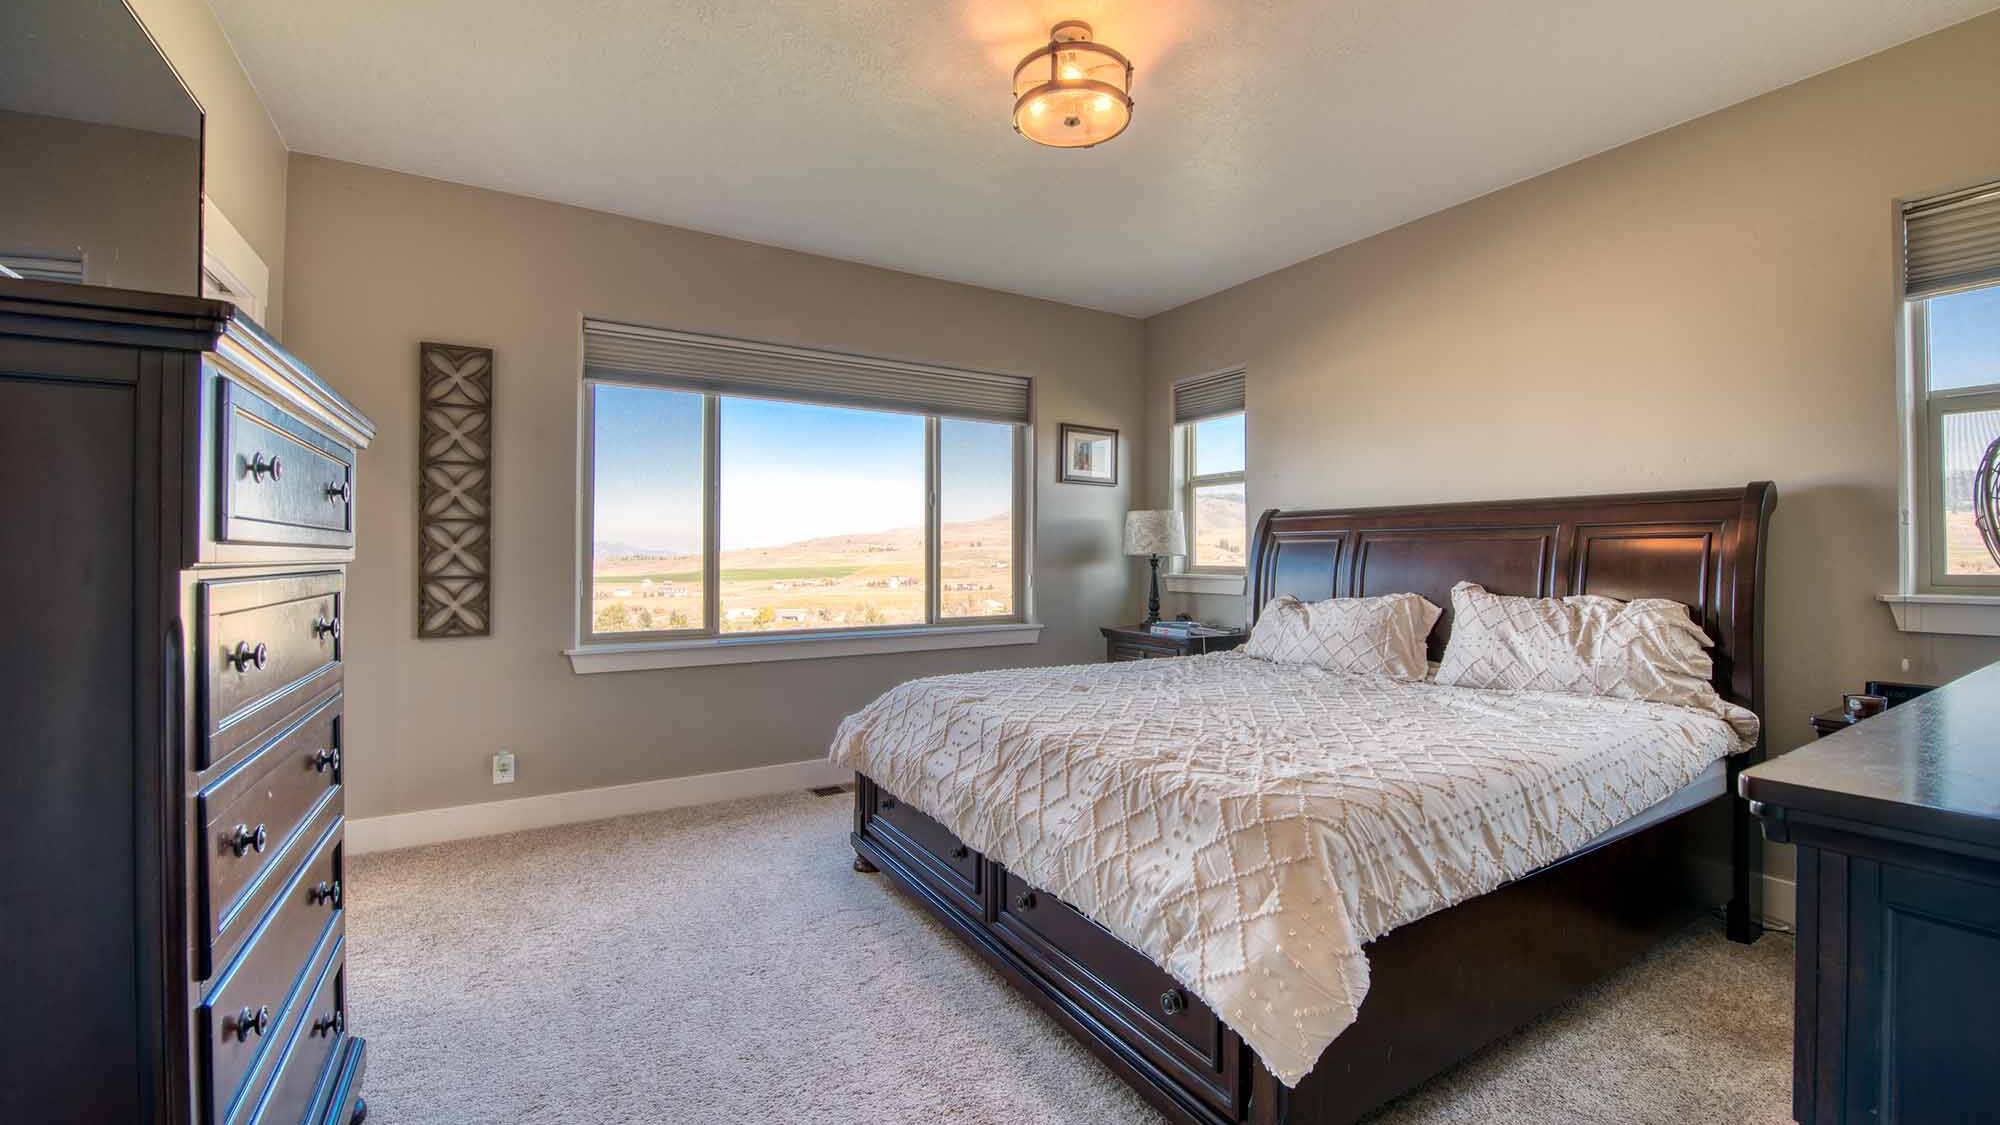 Master bedroom in The Copper Creek model home - Built by Big Sky Builder in Florence, MT